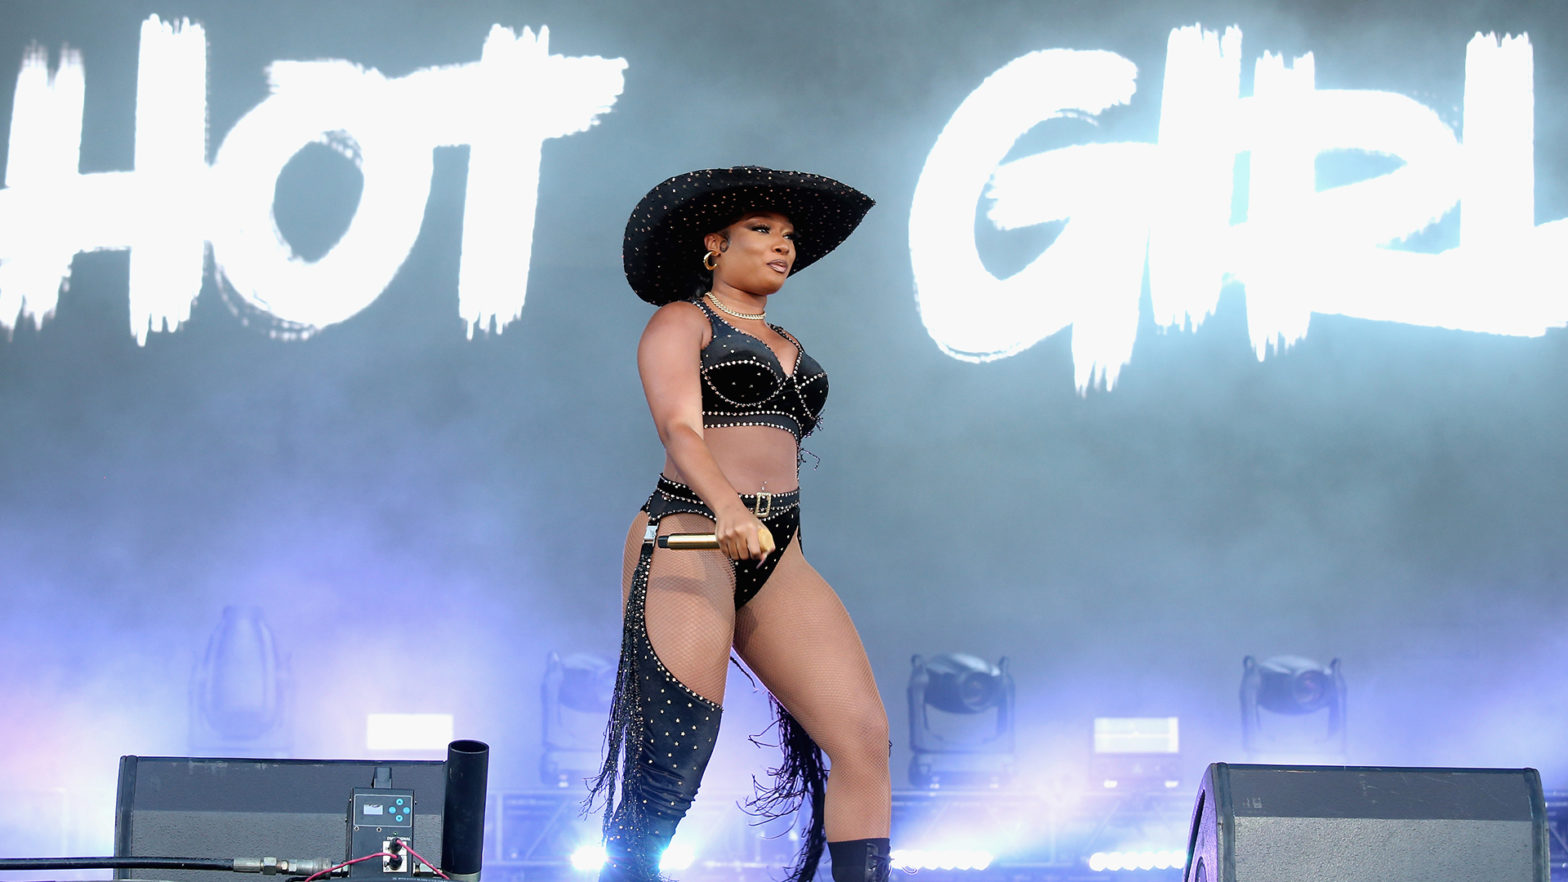 Megan Thee Stallion Now Owns The 'Hot Girl Summer' Trademark After A Two-Year Legal Battle